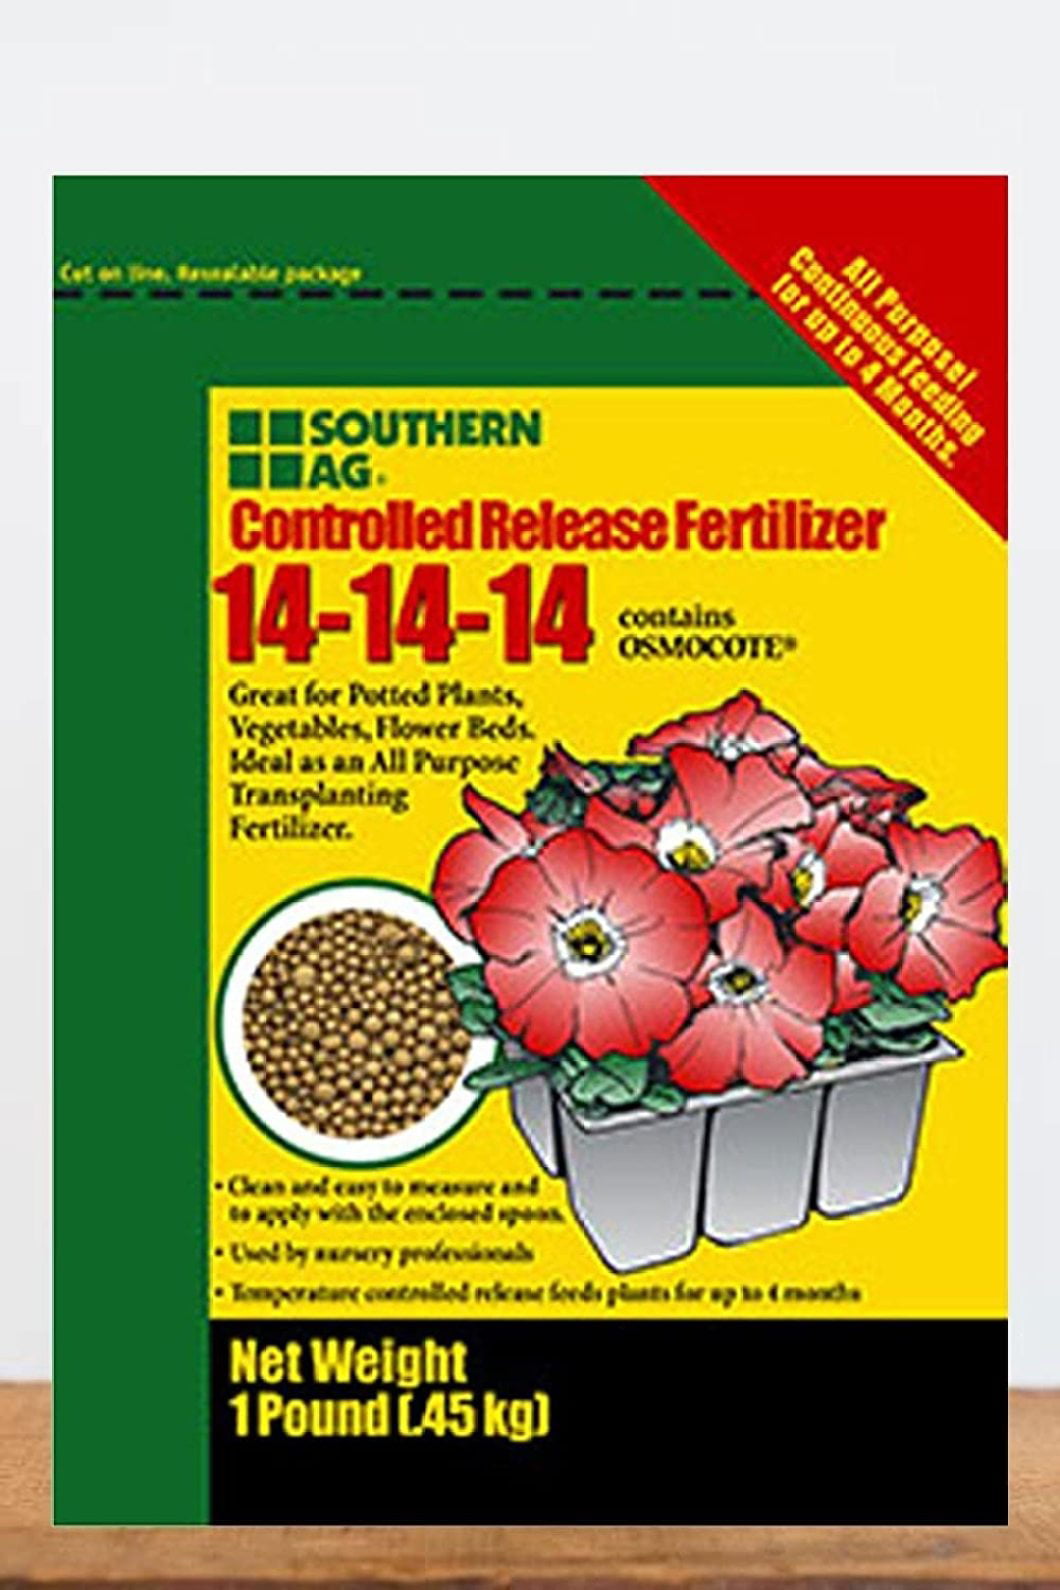 OSMOCOTE High N Controlled Release Fertilizer For All Flowering & plants 